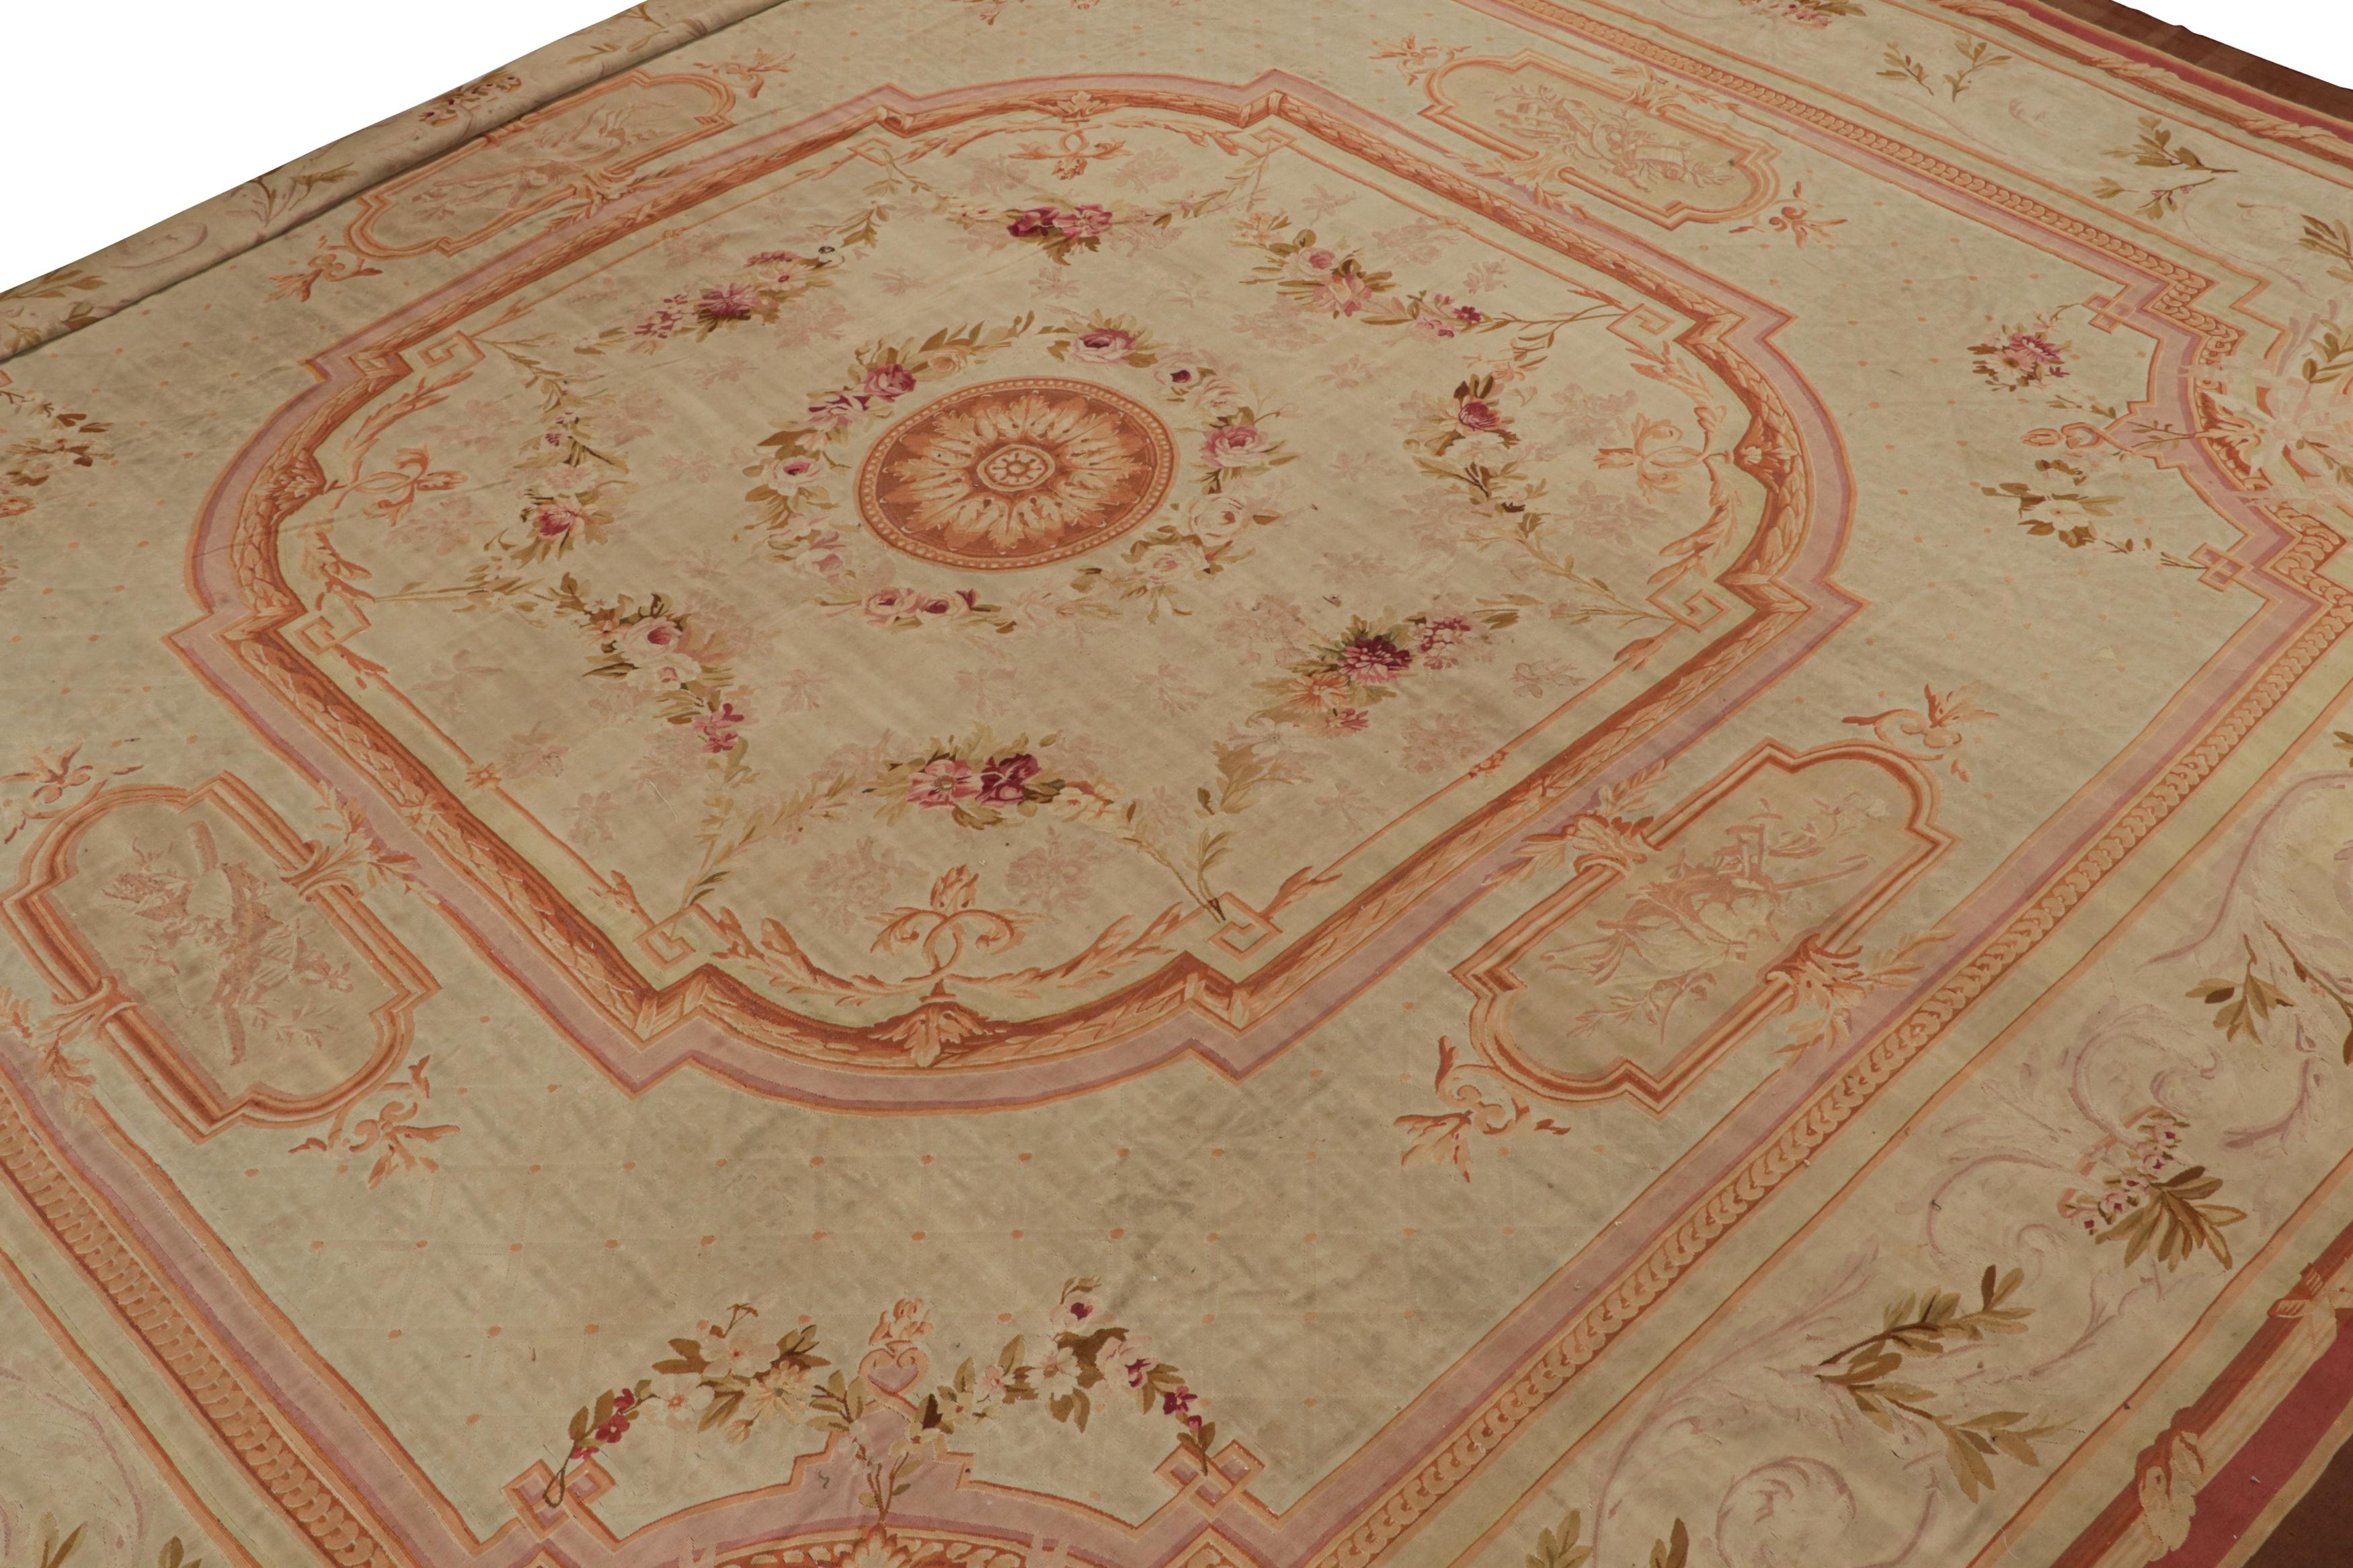 Hand-Woven Antique Aubusson Flatweave Floral Square Rug in Cream and Pink For Sale